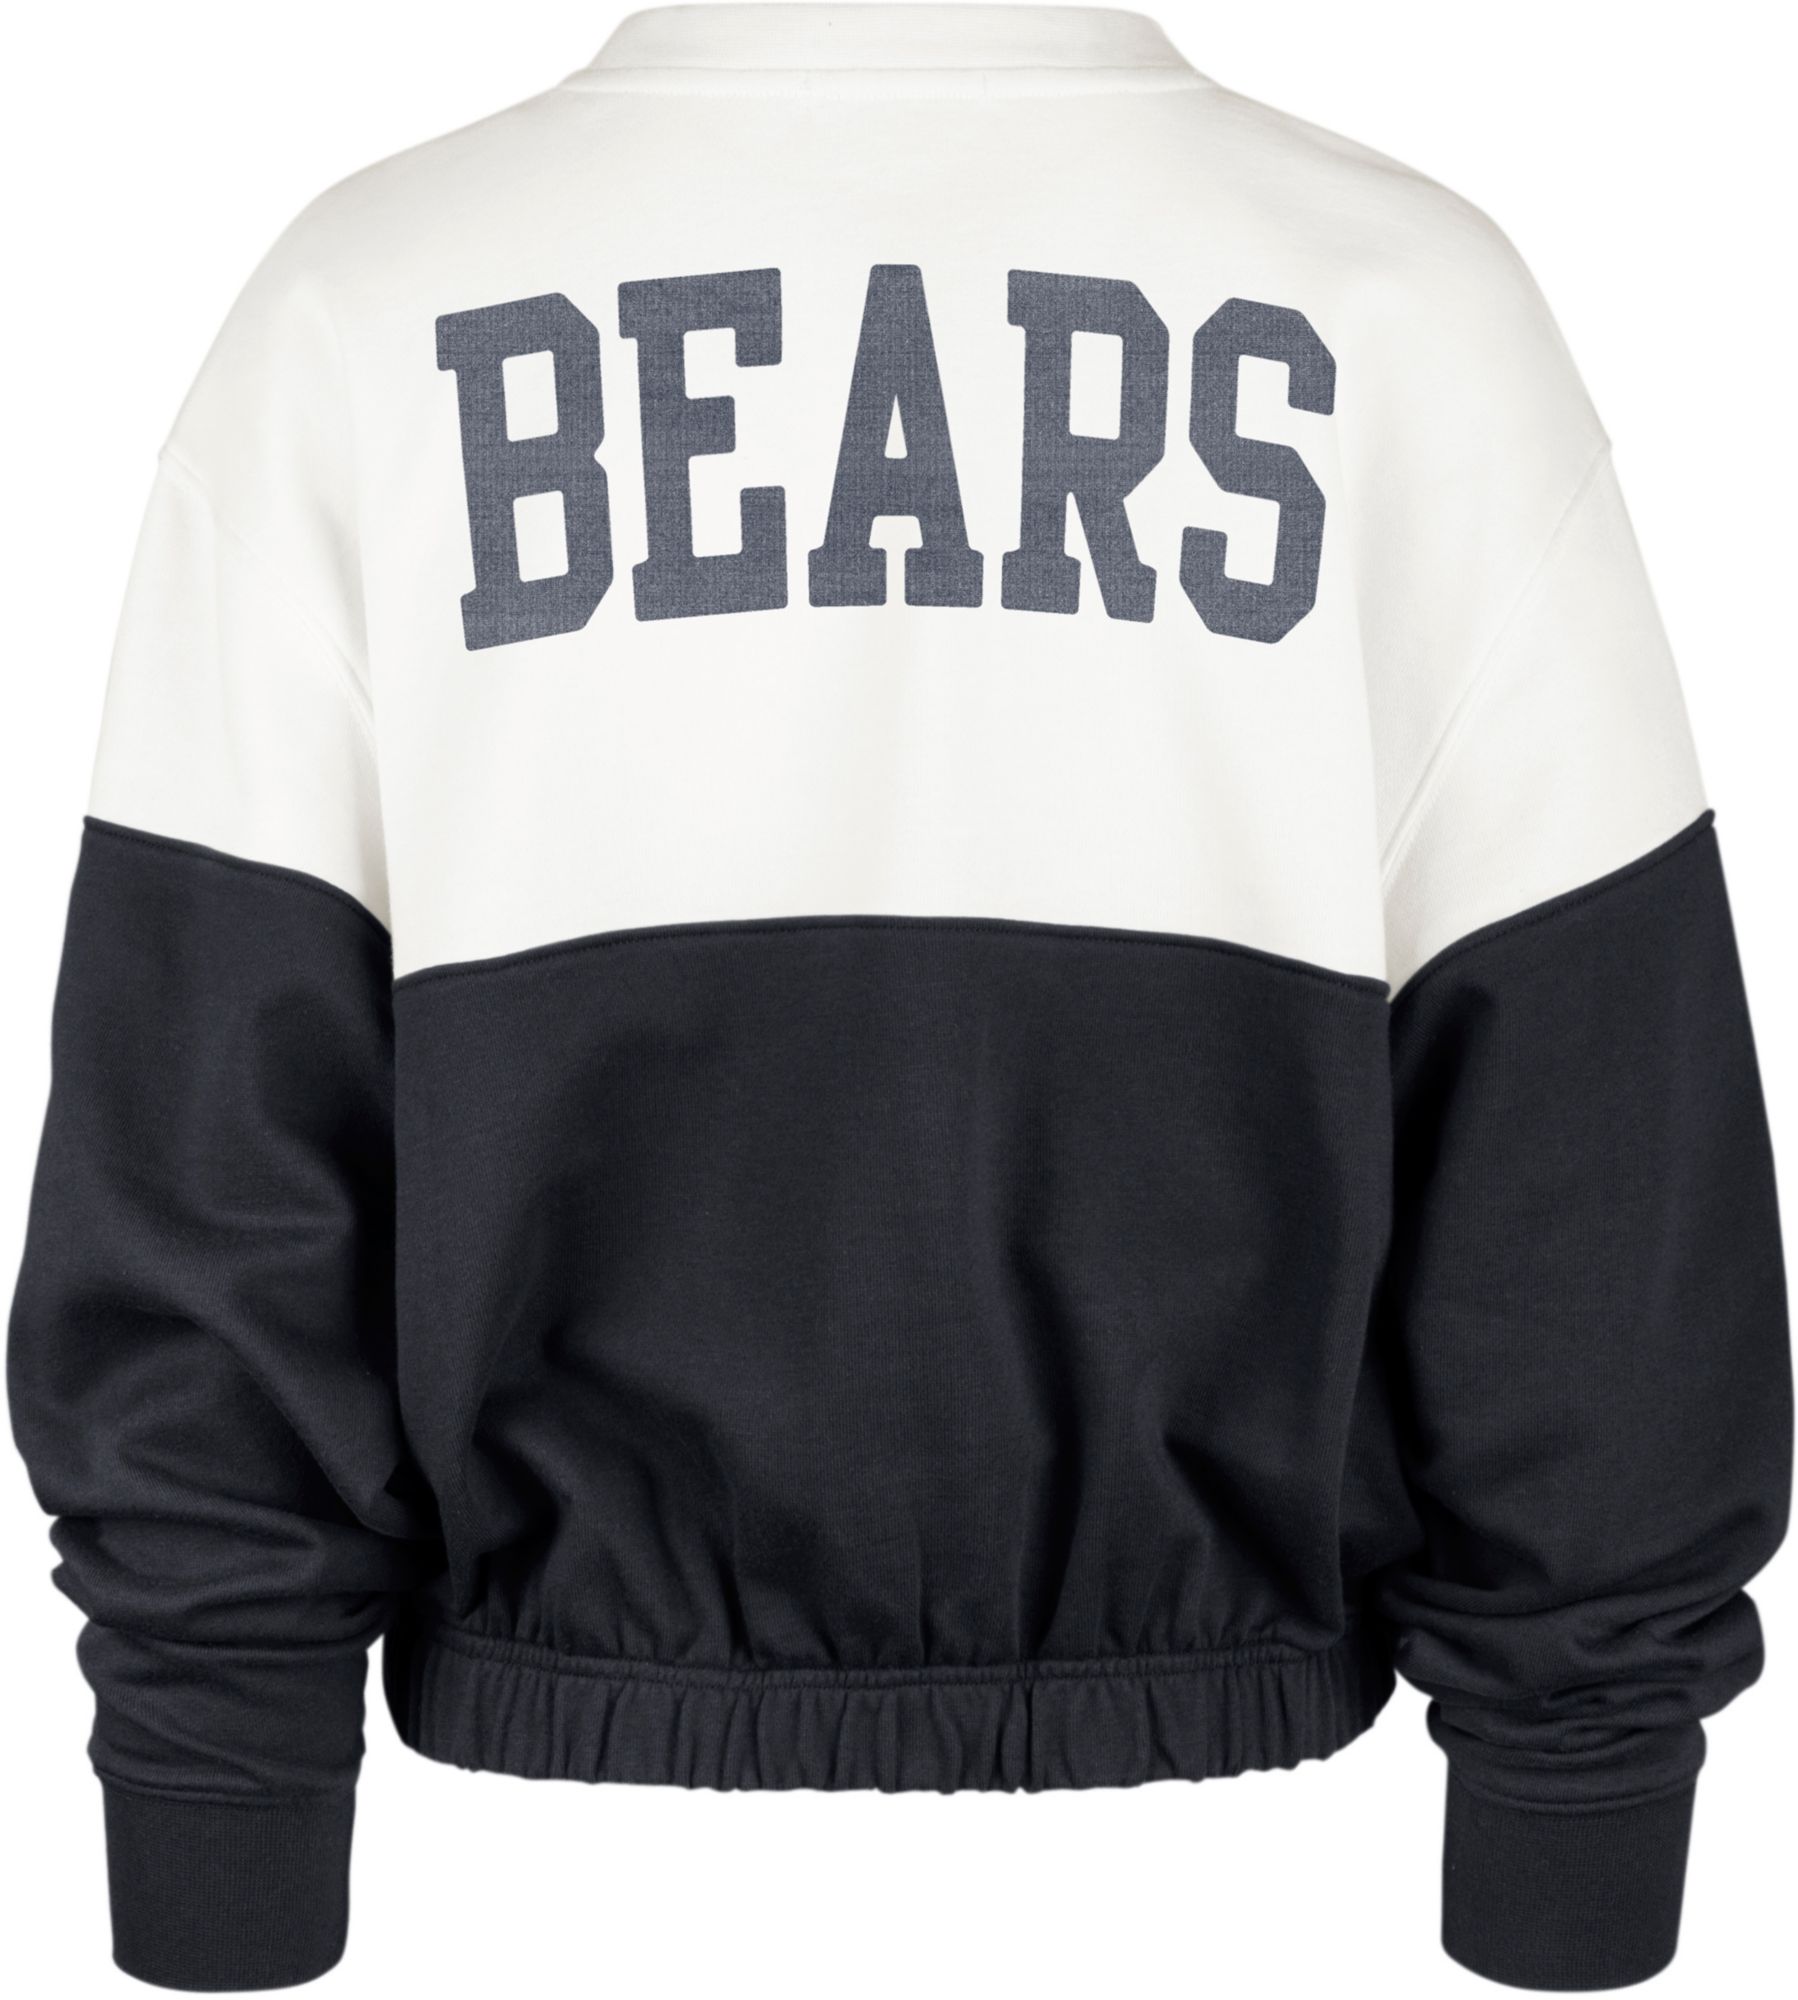 Chicago Bears Gifts, Gear, Bears Apparel, Chicago Bears Pro Shop